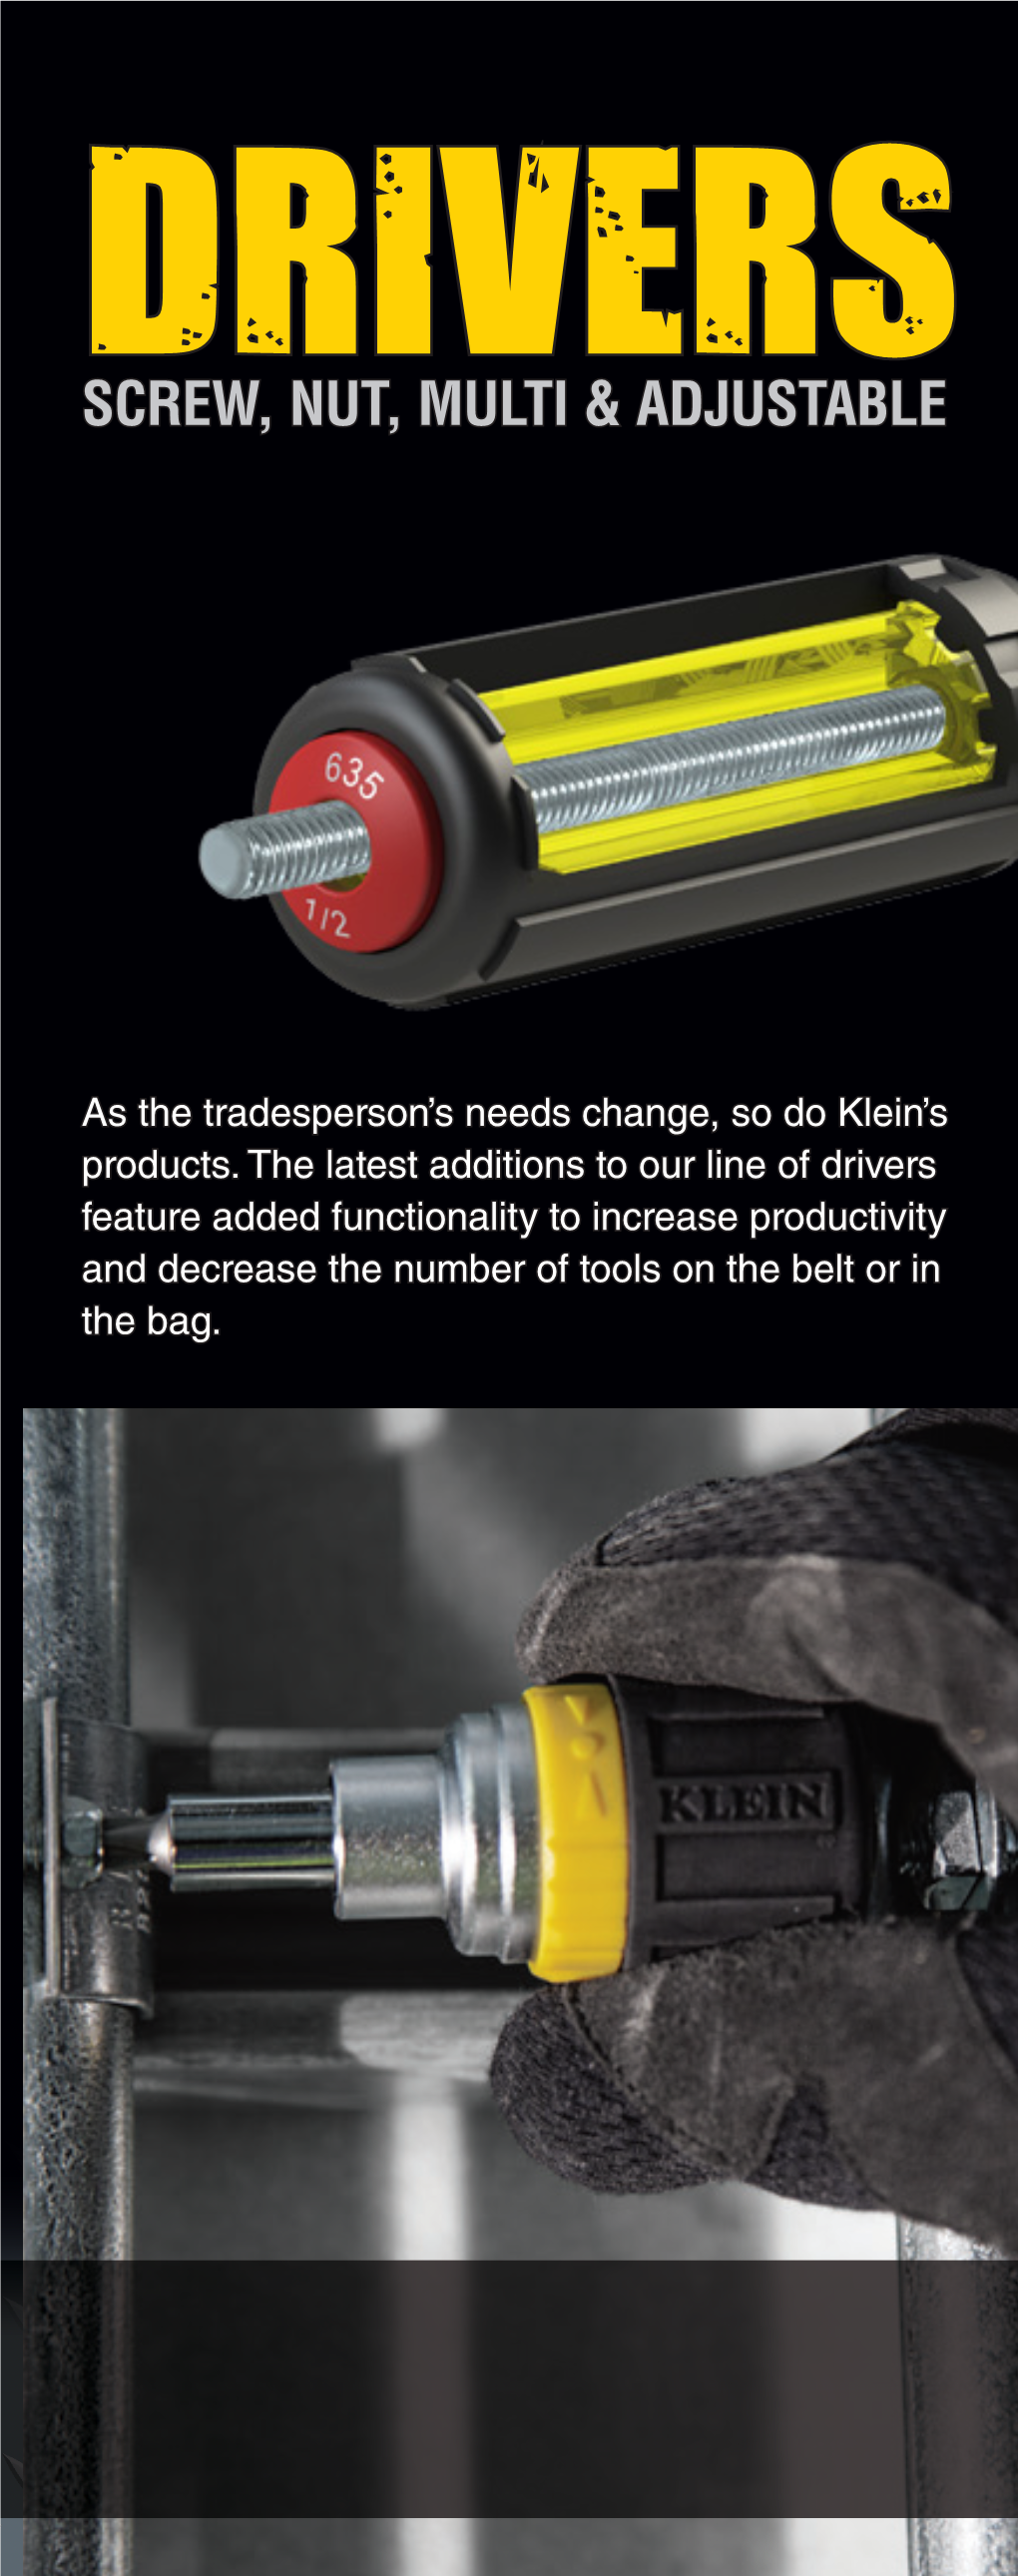 What's New in Screwdrivers & Nut Drivers